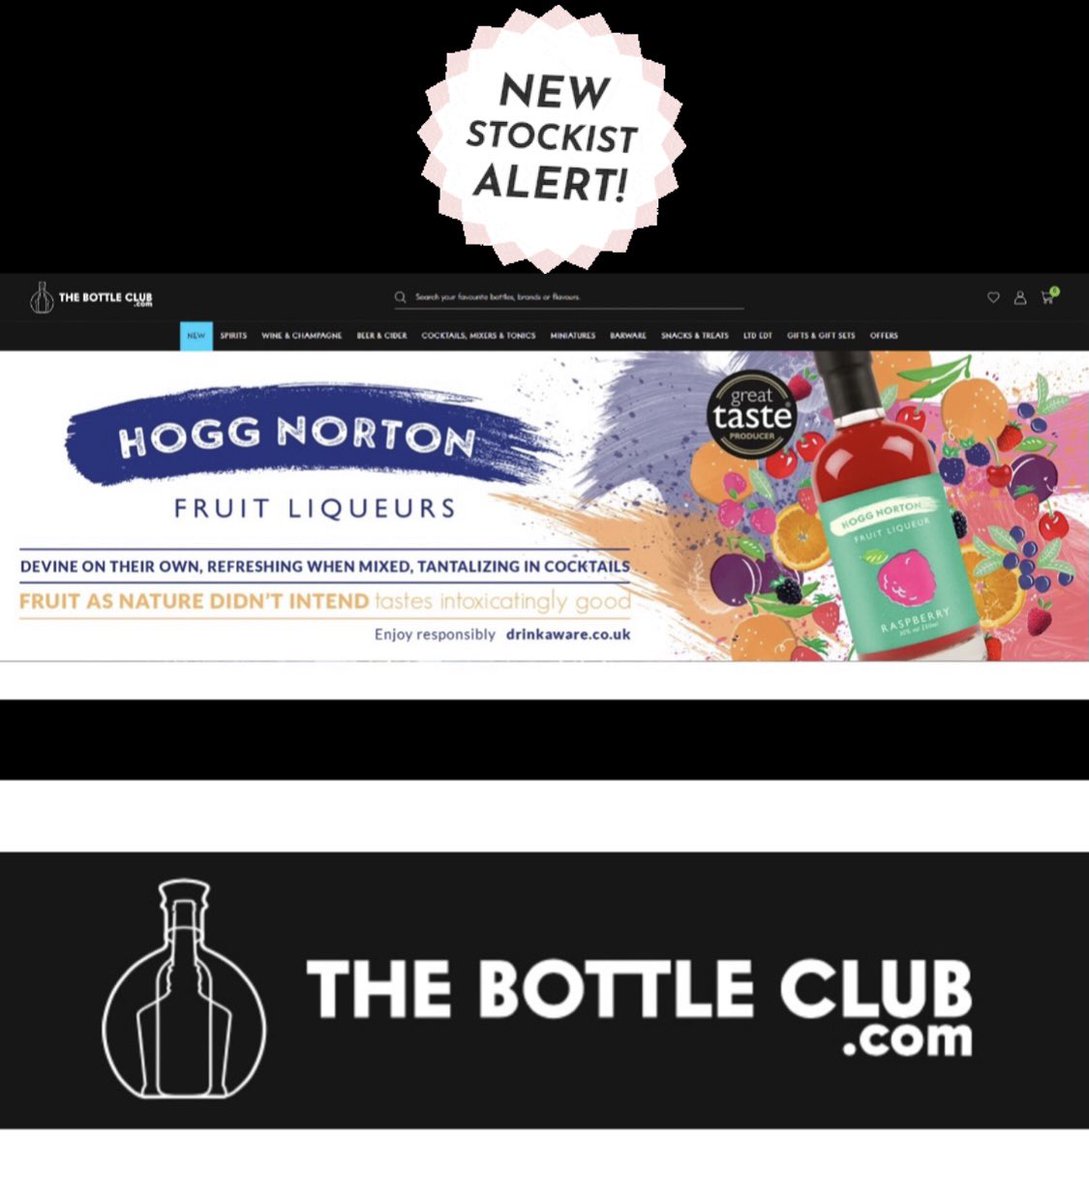 We have had an exciting but busy few weeks and it’s been worth it!! Just seen our advert on our new stockist - The Bottle Club website!!

#thebottleclub #newstockist #hoggnorton #fruitliqueur